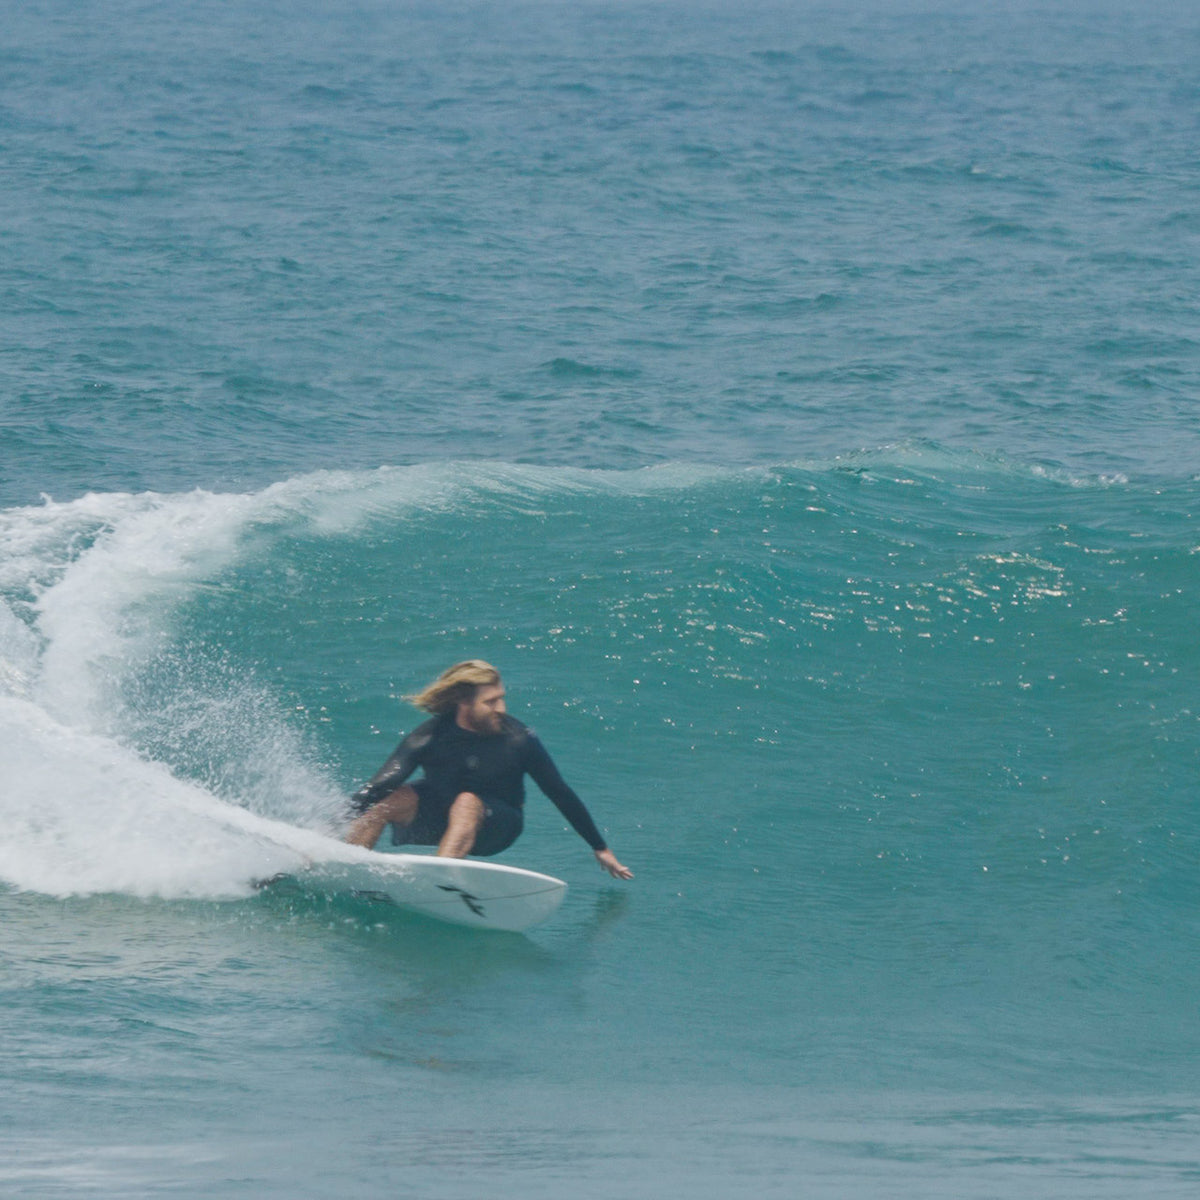 Wade Carmichael turning his 421 Fish as much as it can turn! - Rusty Surfboards